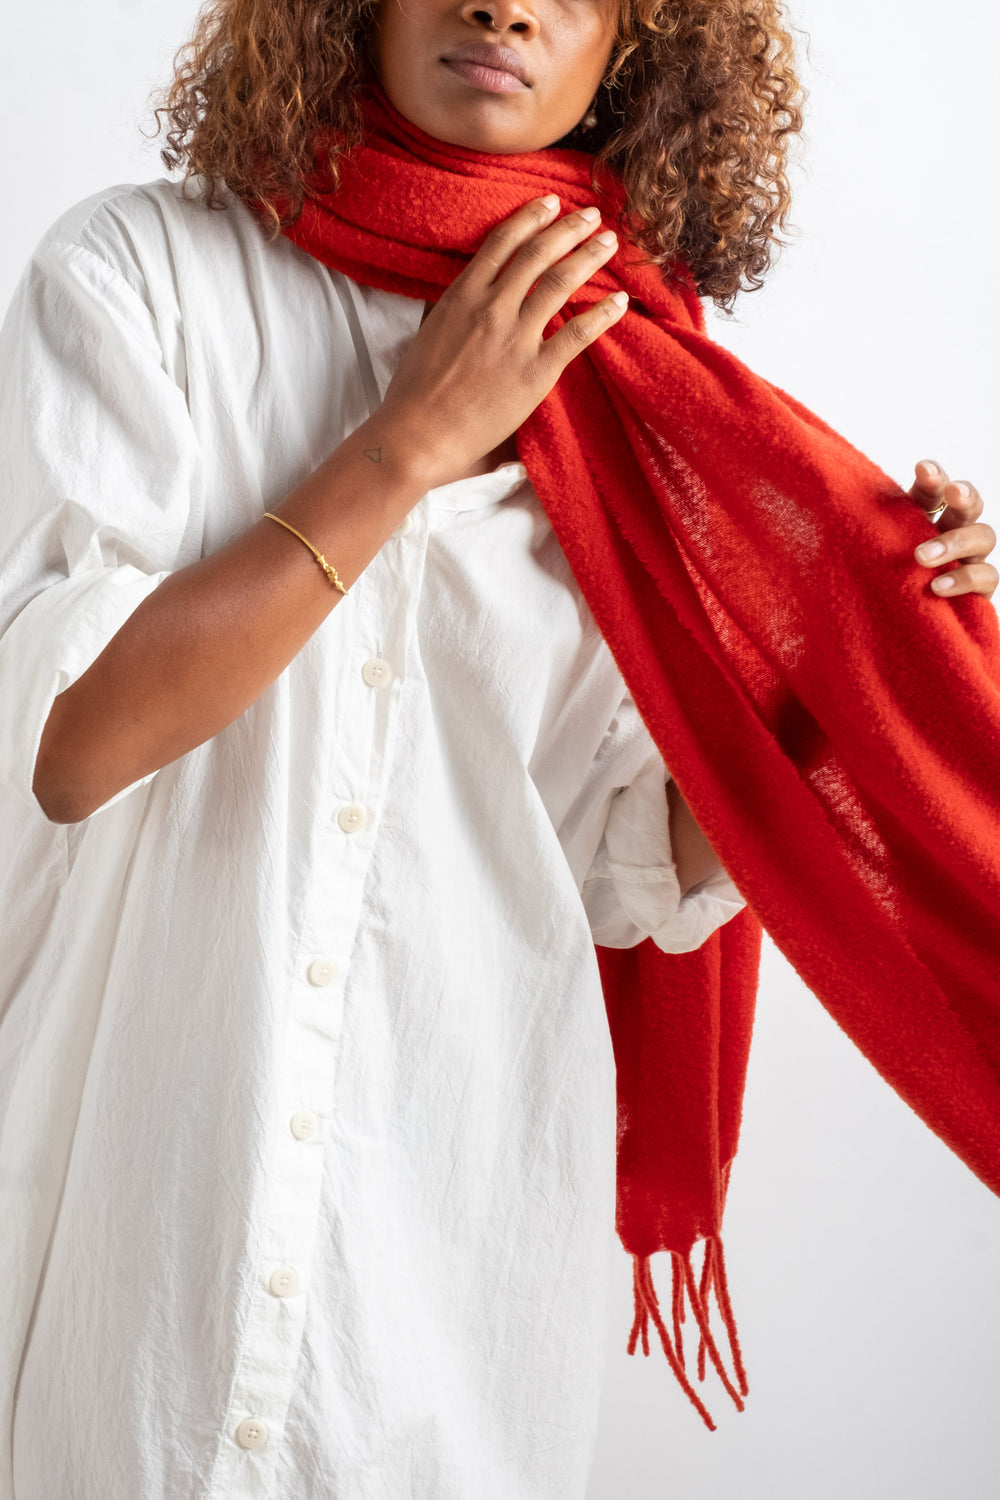 Melt Stola Scarf In Red